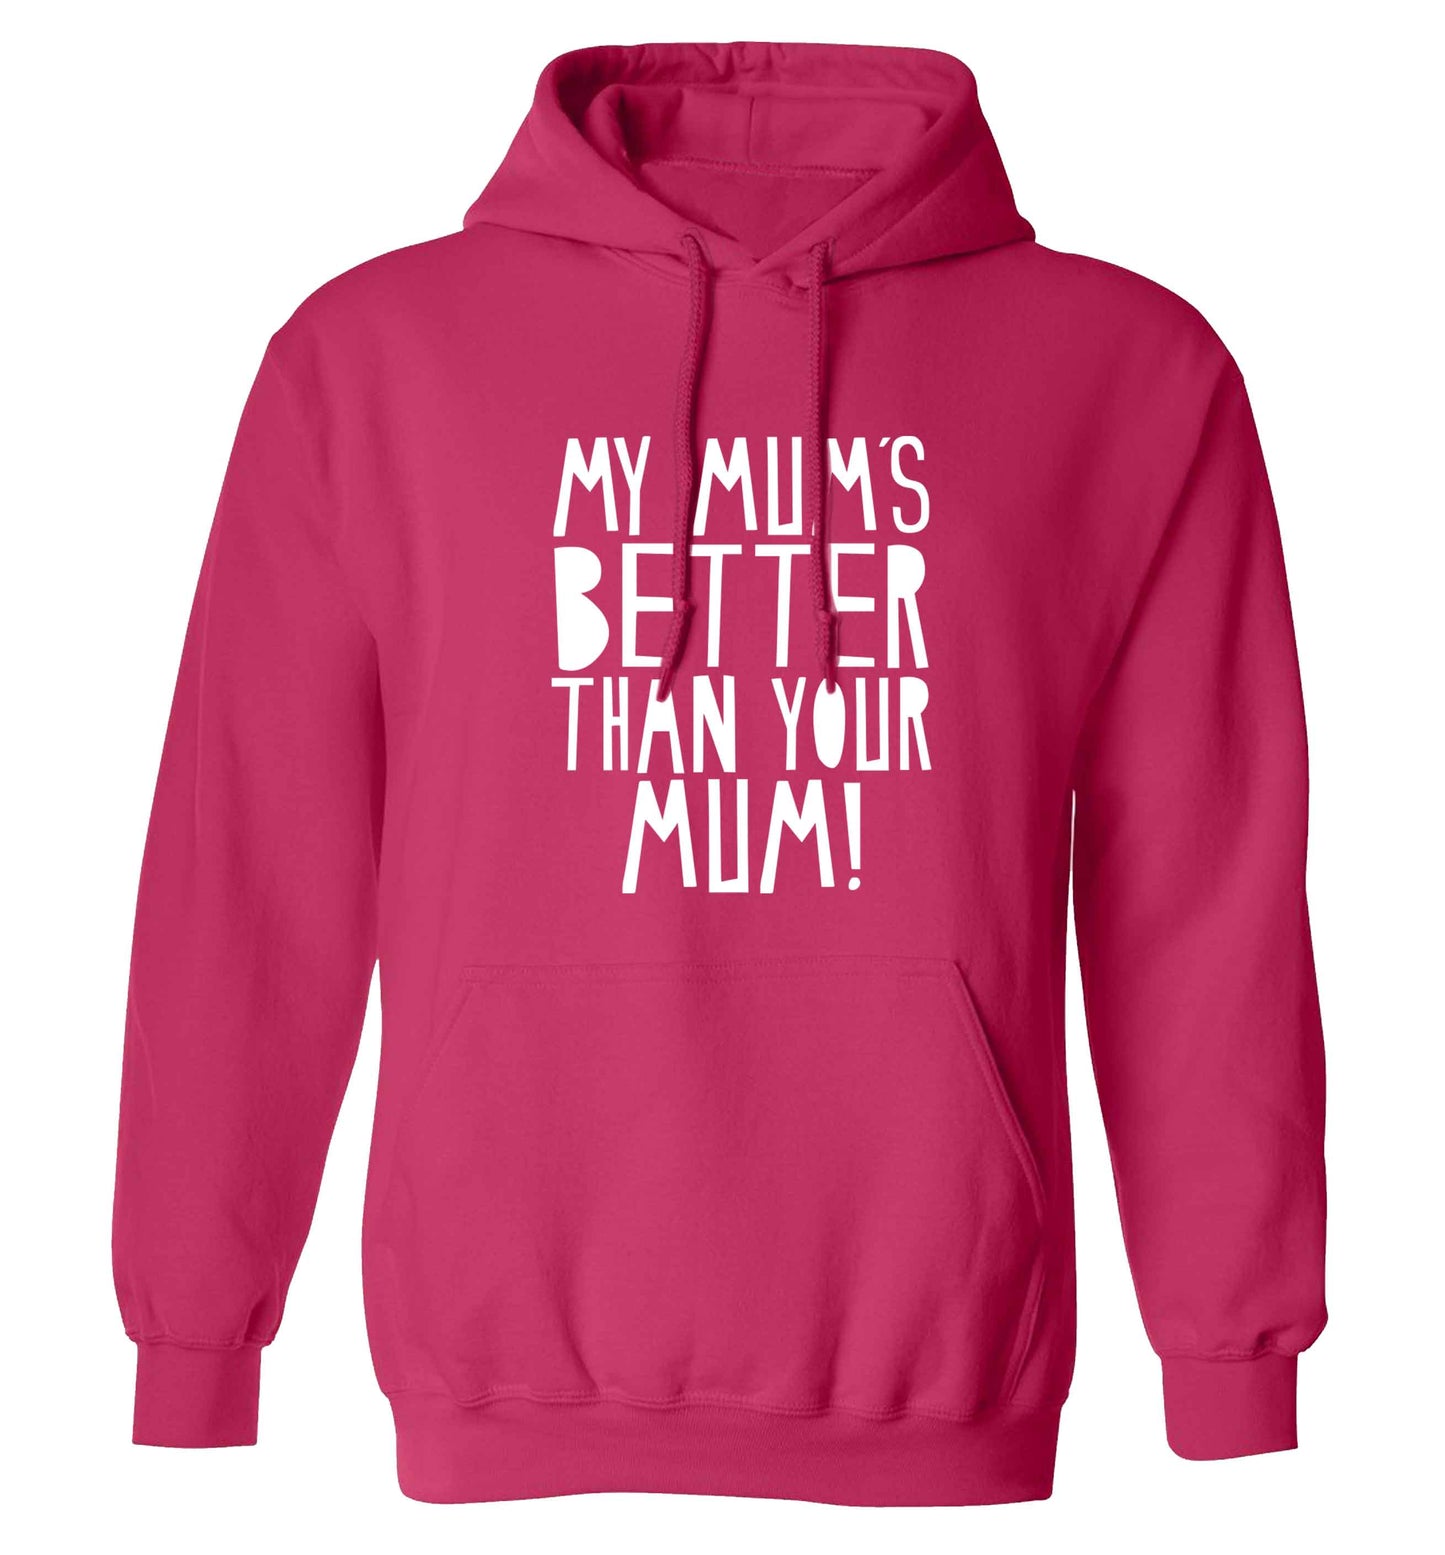 My mum's better than your mum adults unisex pink hoodie 2XL